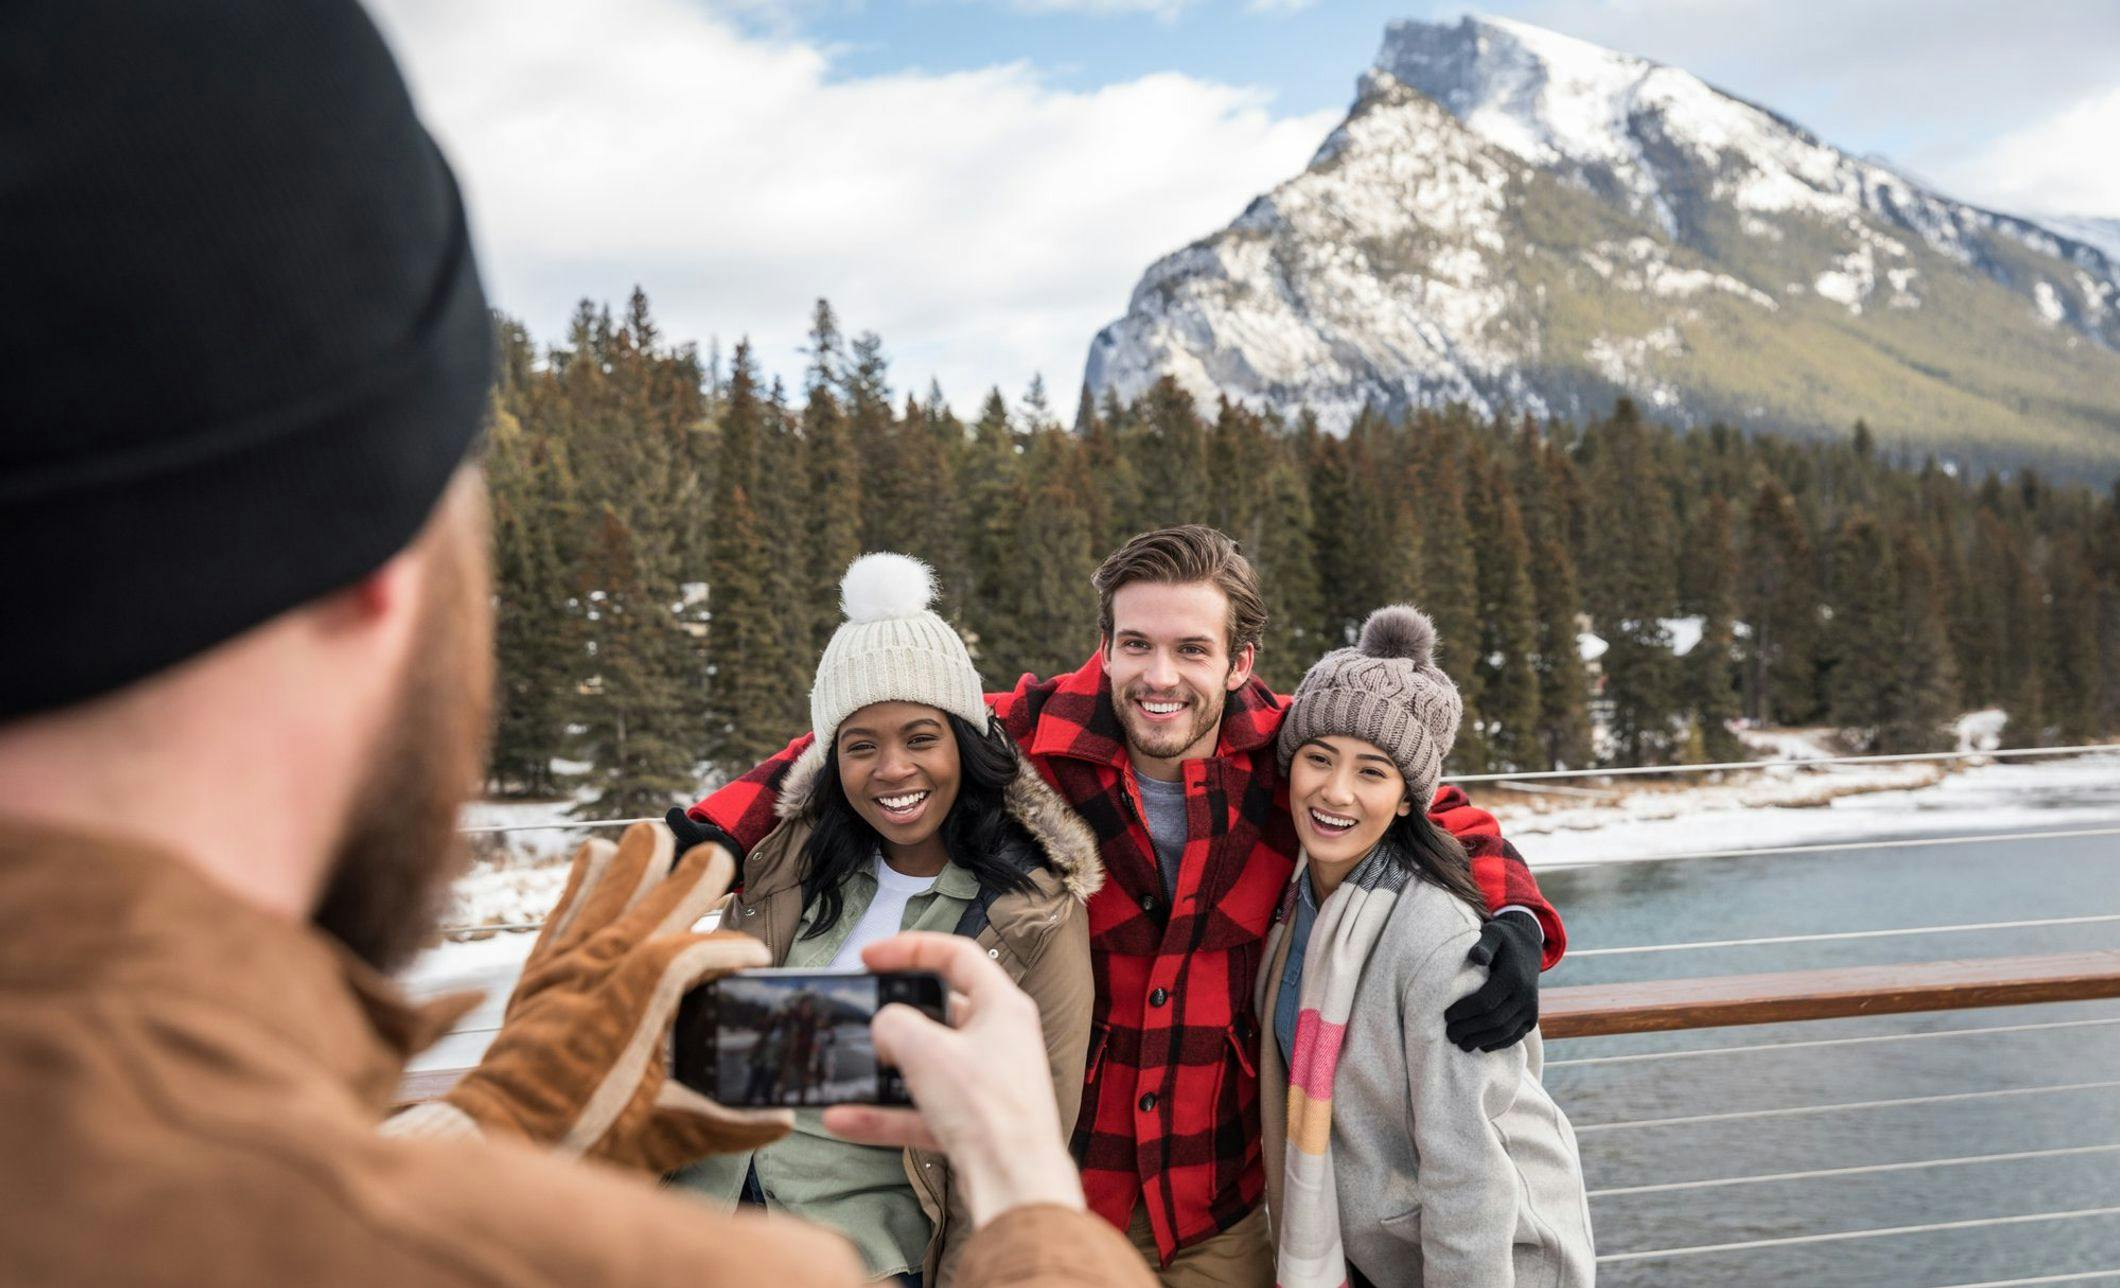 Three friends pose for a photo wearing light winter layers and a snowy Mount Rundle behind them